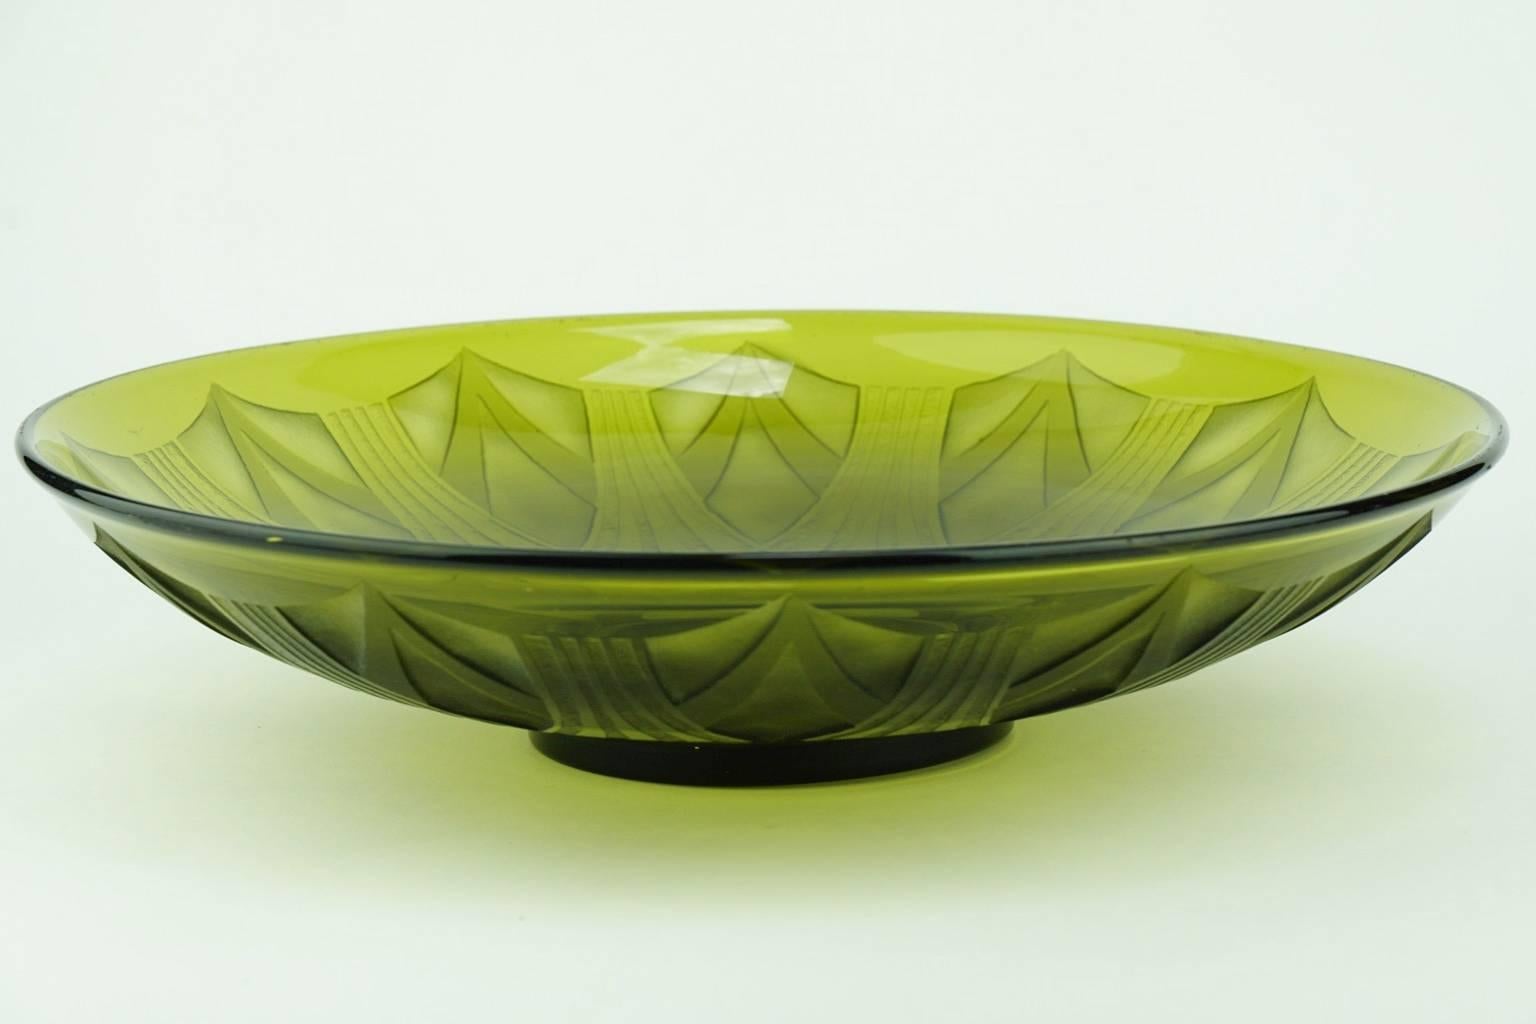 Large decorative dish in typical Art Deco Legras olive green acid-etched glass. Signed.